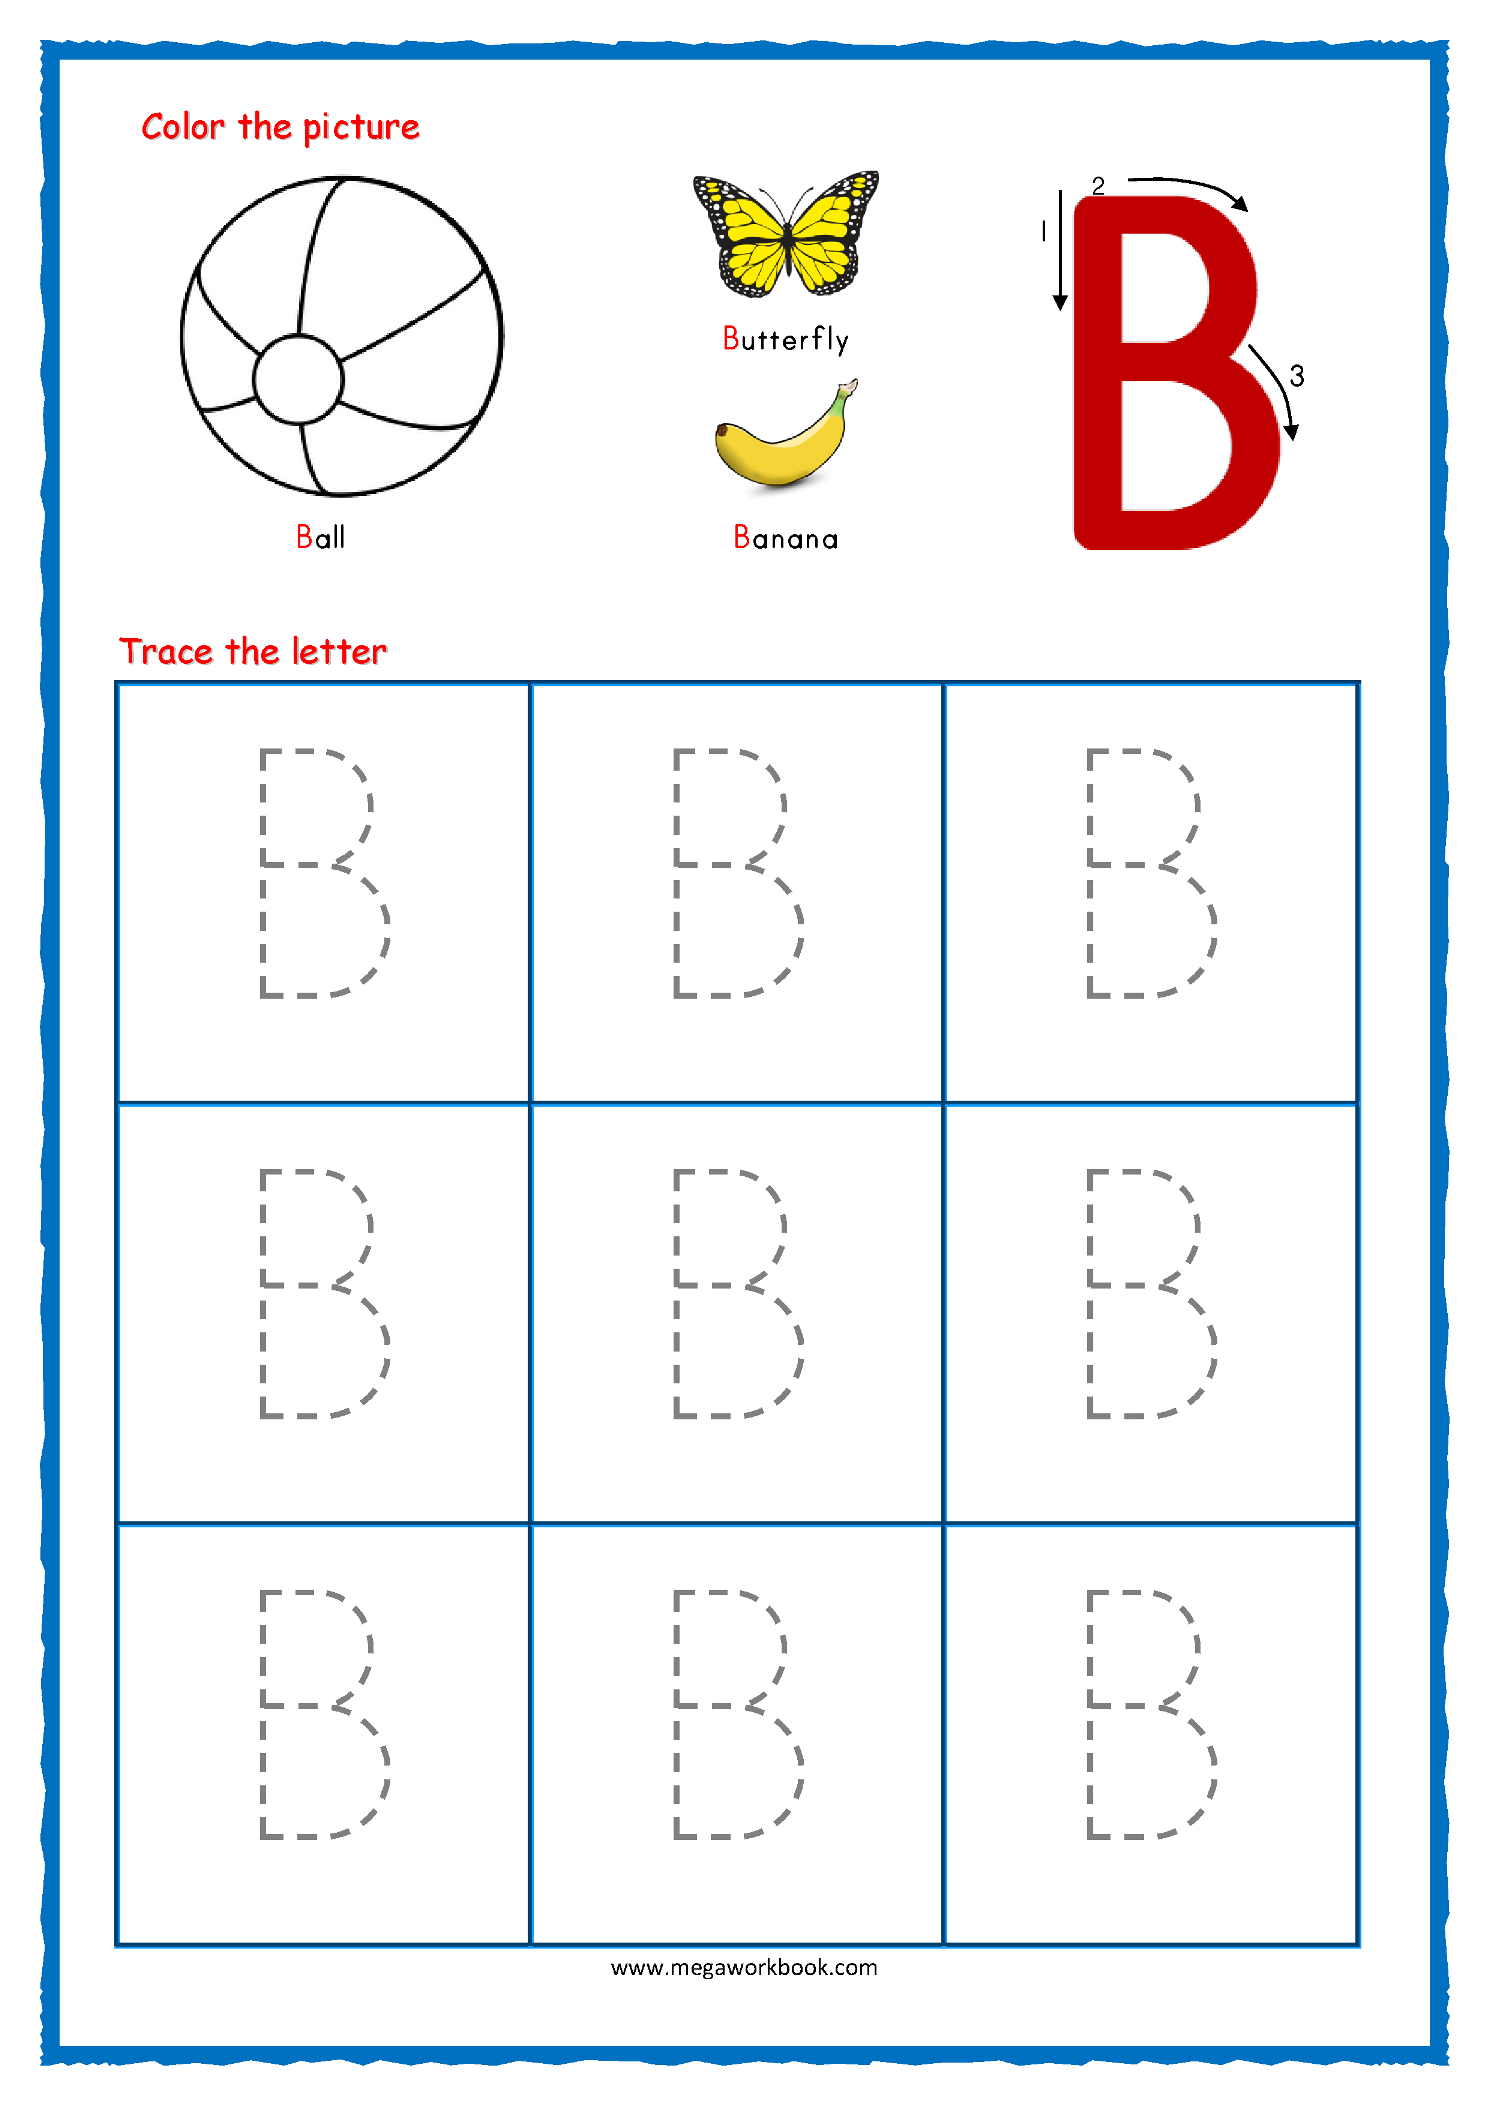 Coloring Book : Letter Tracingts Free Printable Coloring with Dash Letters For Tracing